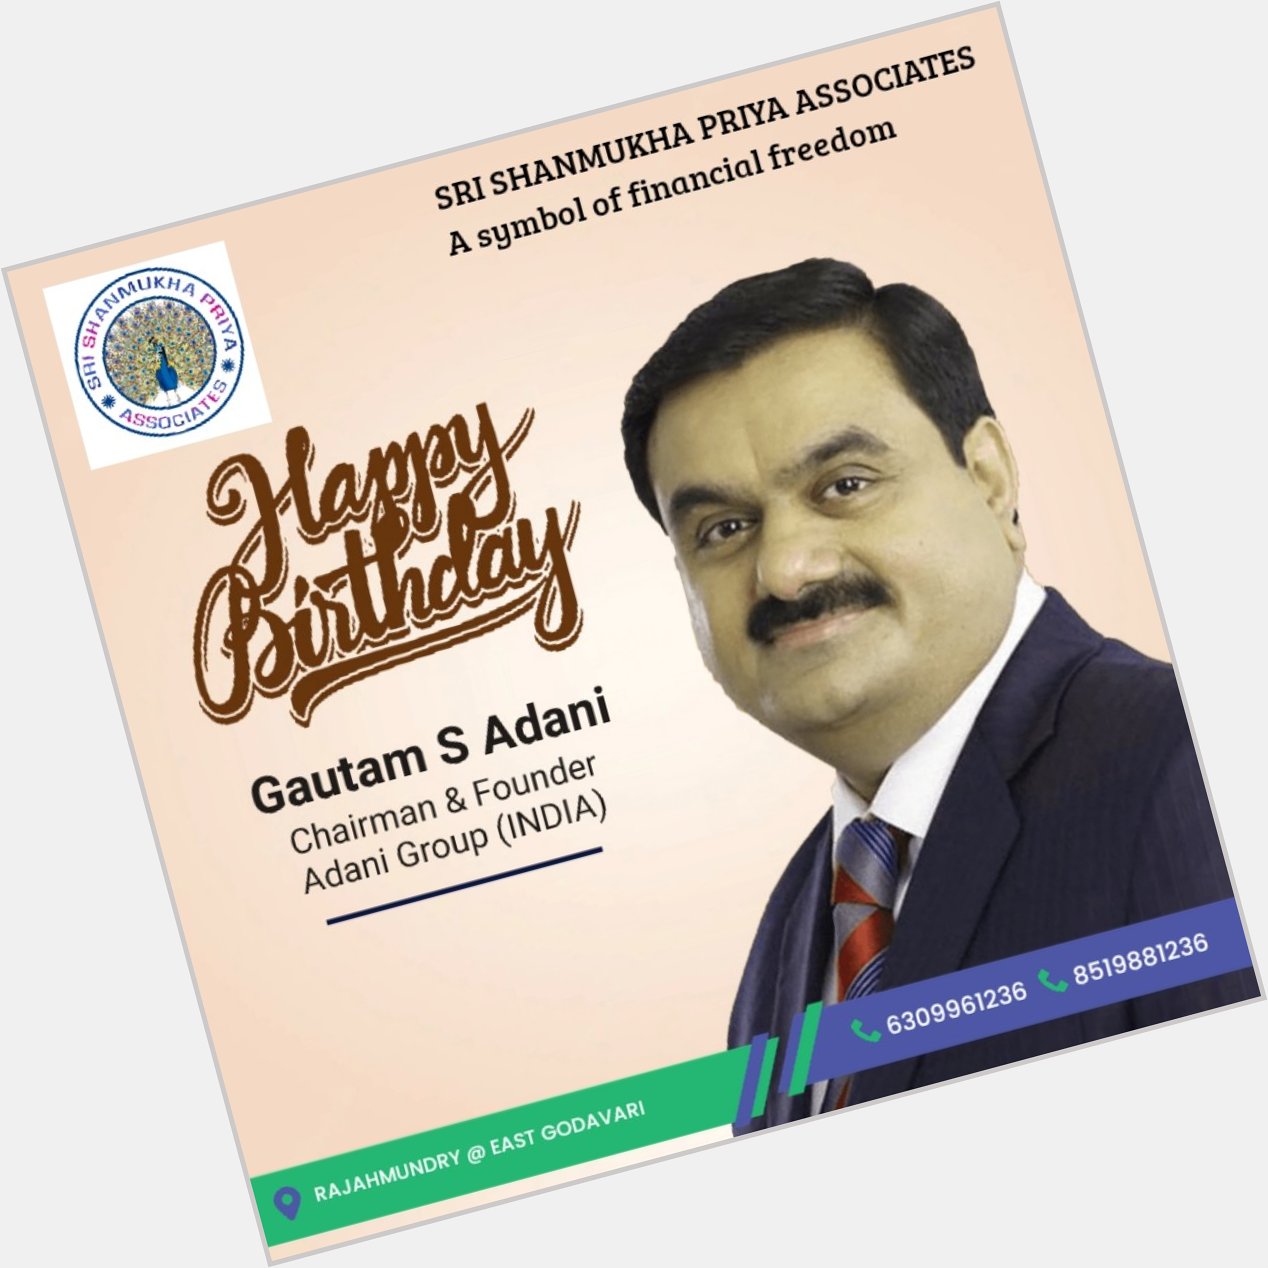 Mr Gautam Adani is the Founder and Chairman of the Adani Group,
Happy birthday sir  